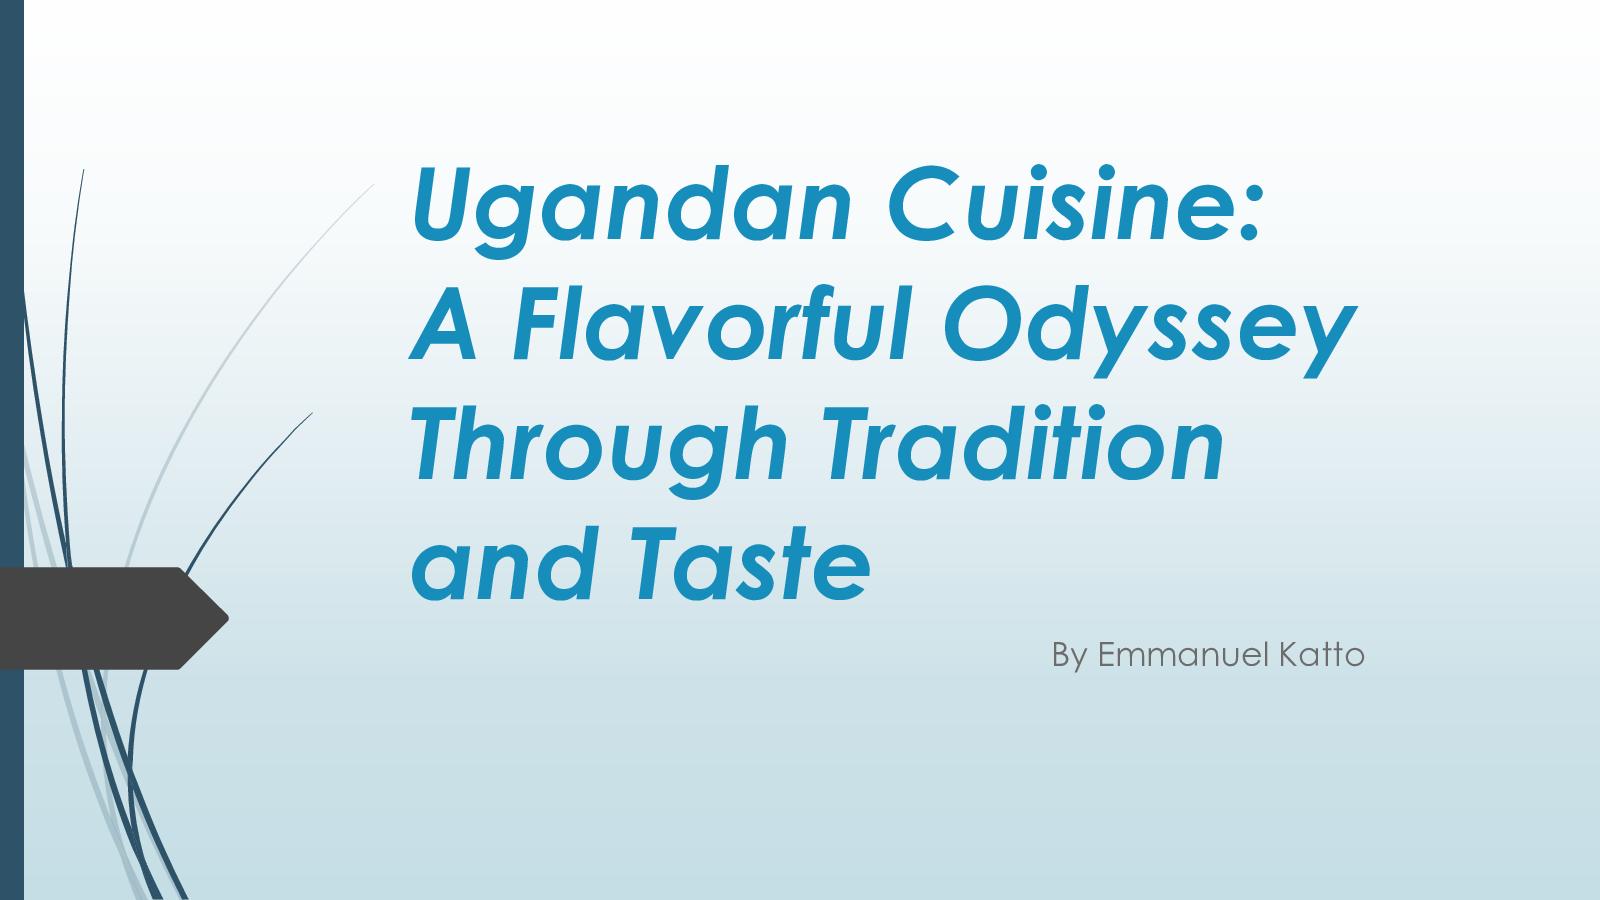 Calaméo - The Tradition and Taste of Ugandan Cuisine by Emmanuel Katto